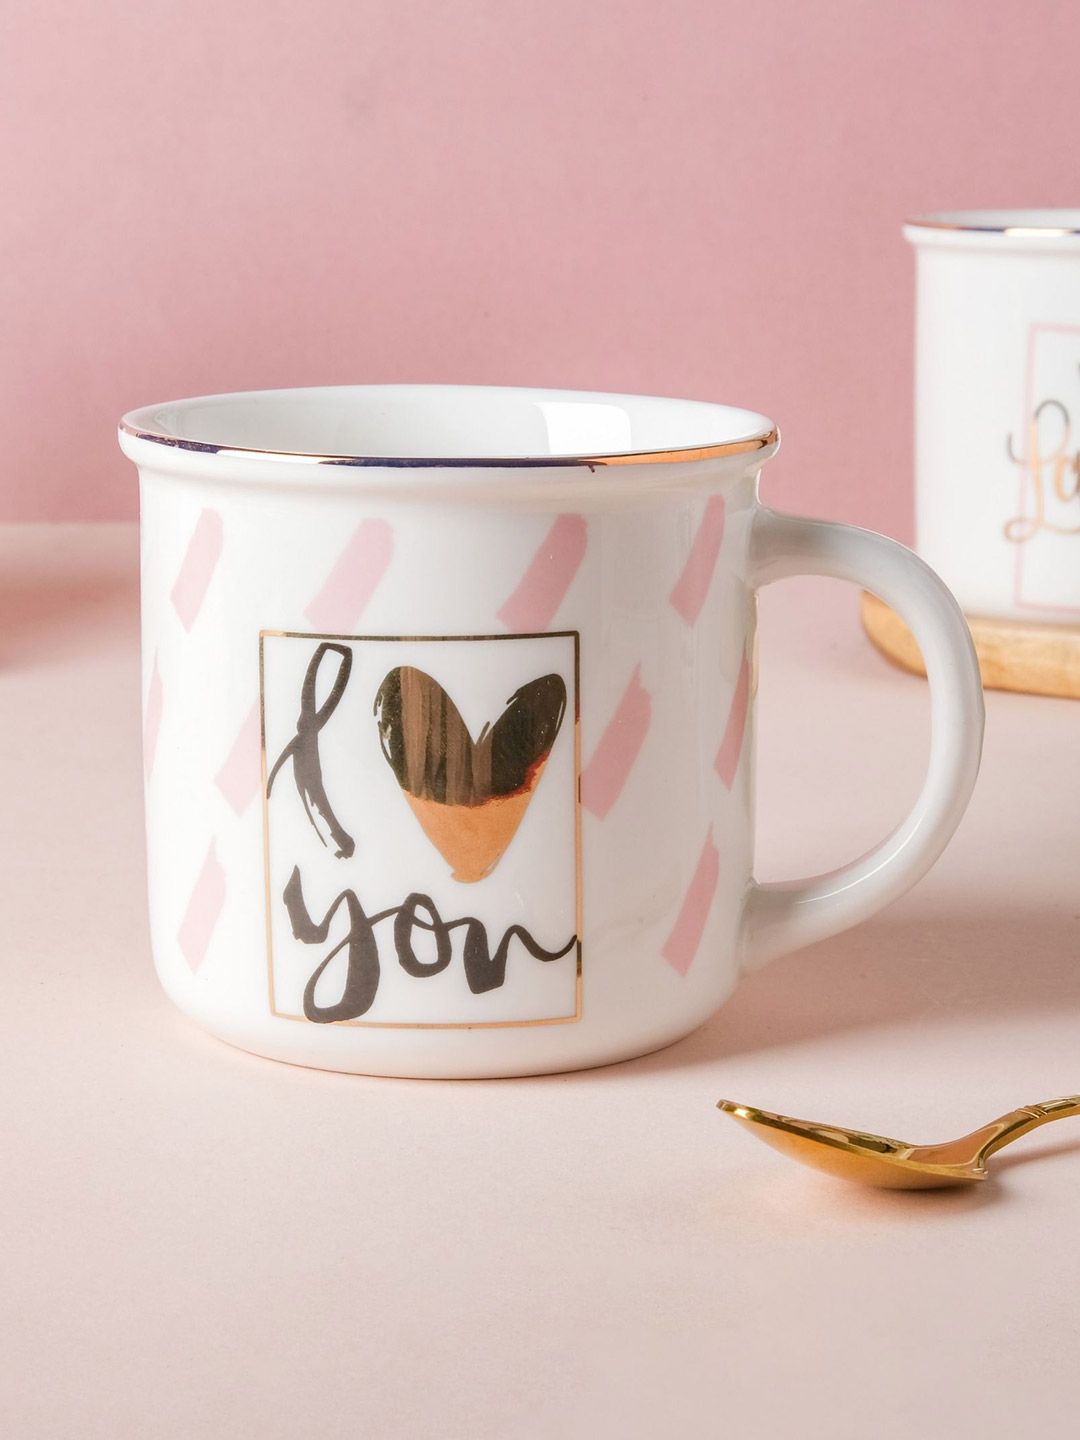 Nestasia White and Pink Love Printed Mug For Coffee Price in India